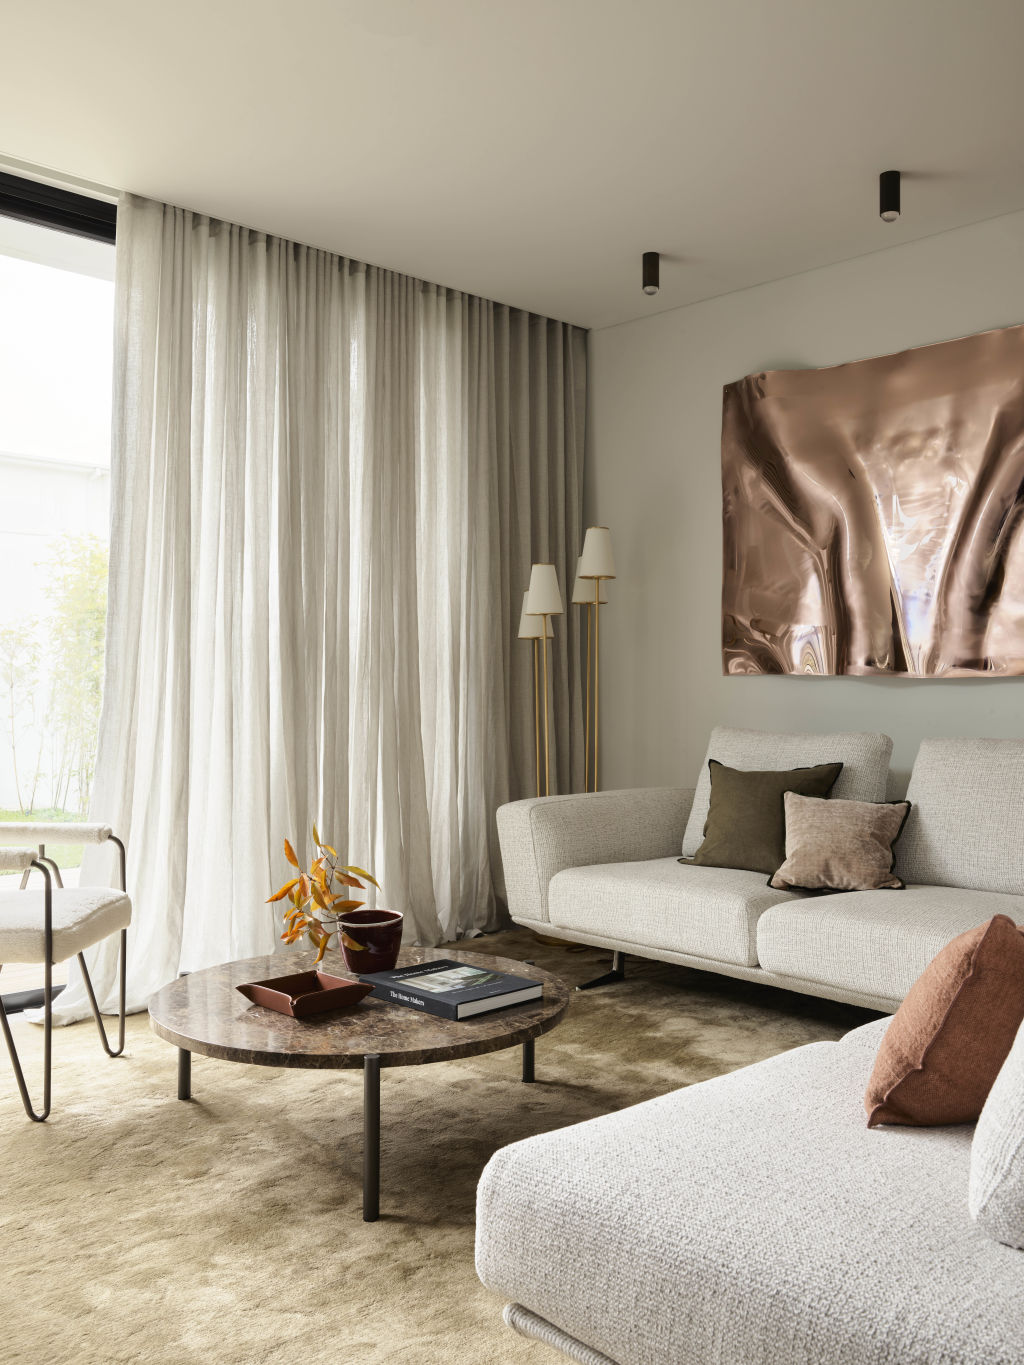 The living room features a brass artwork by local artist Anya Pesce. Styling: Claire Del Mar. Photo: Anson Smart